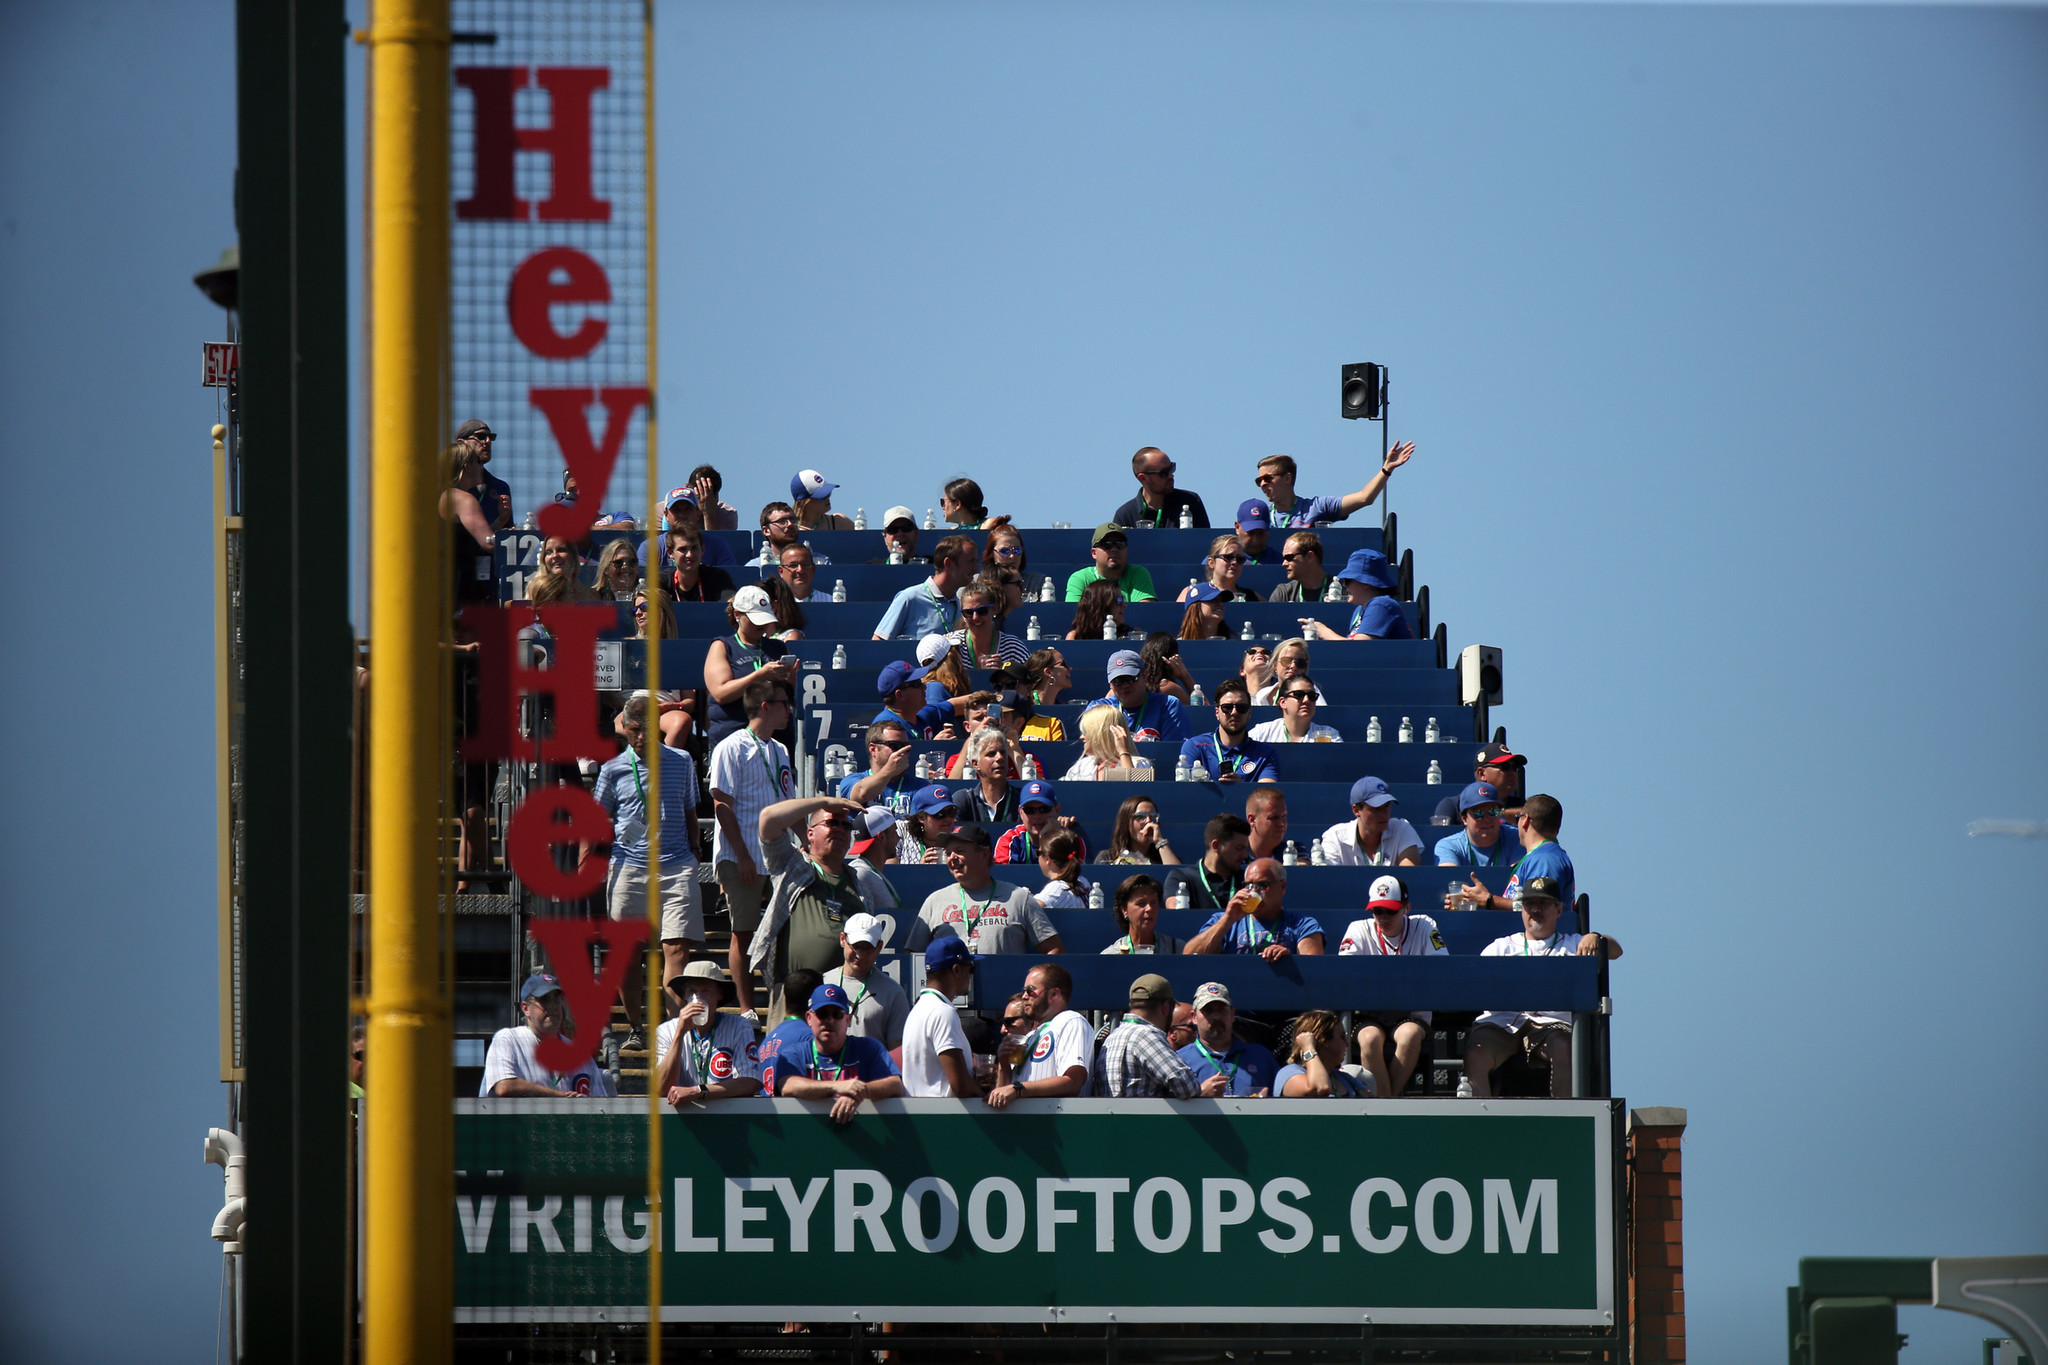 Wrigley Field rooftops to open for Cubs games, manager says